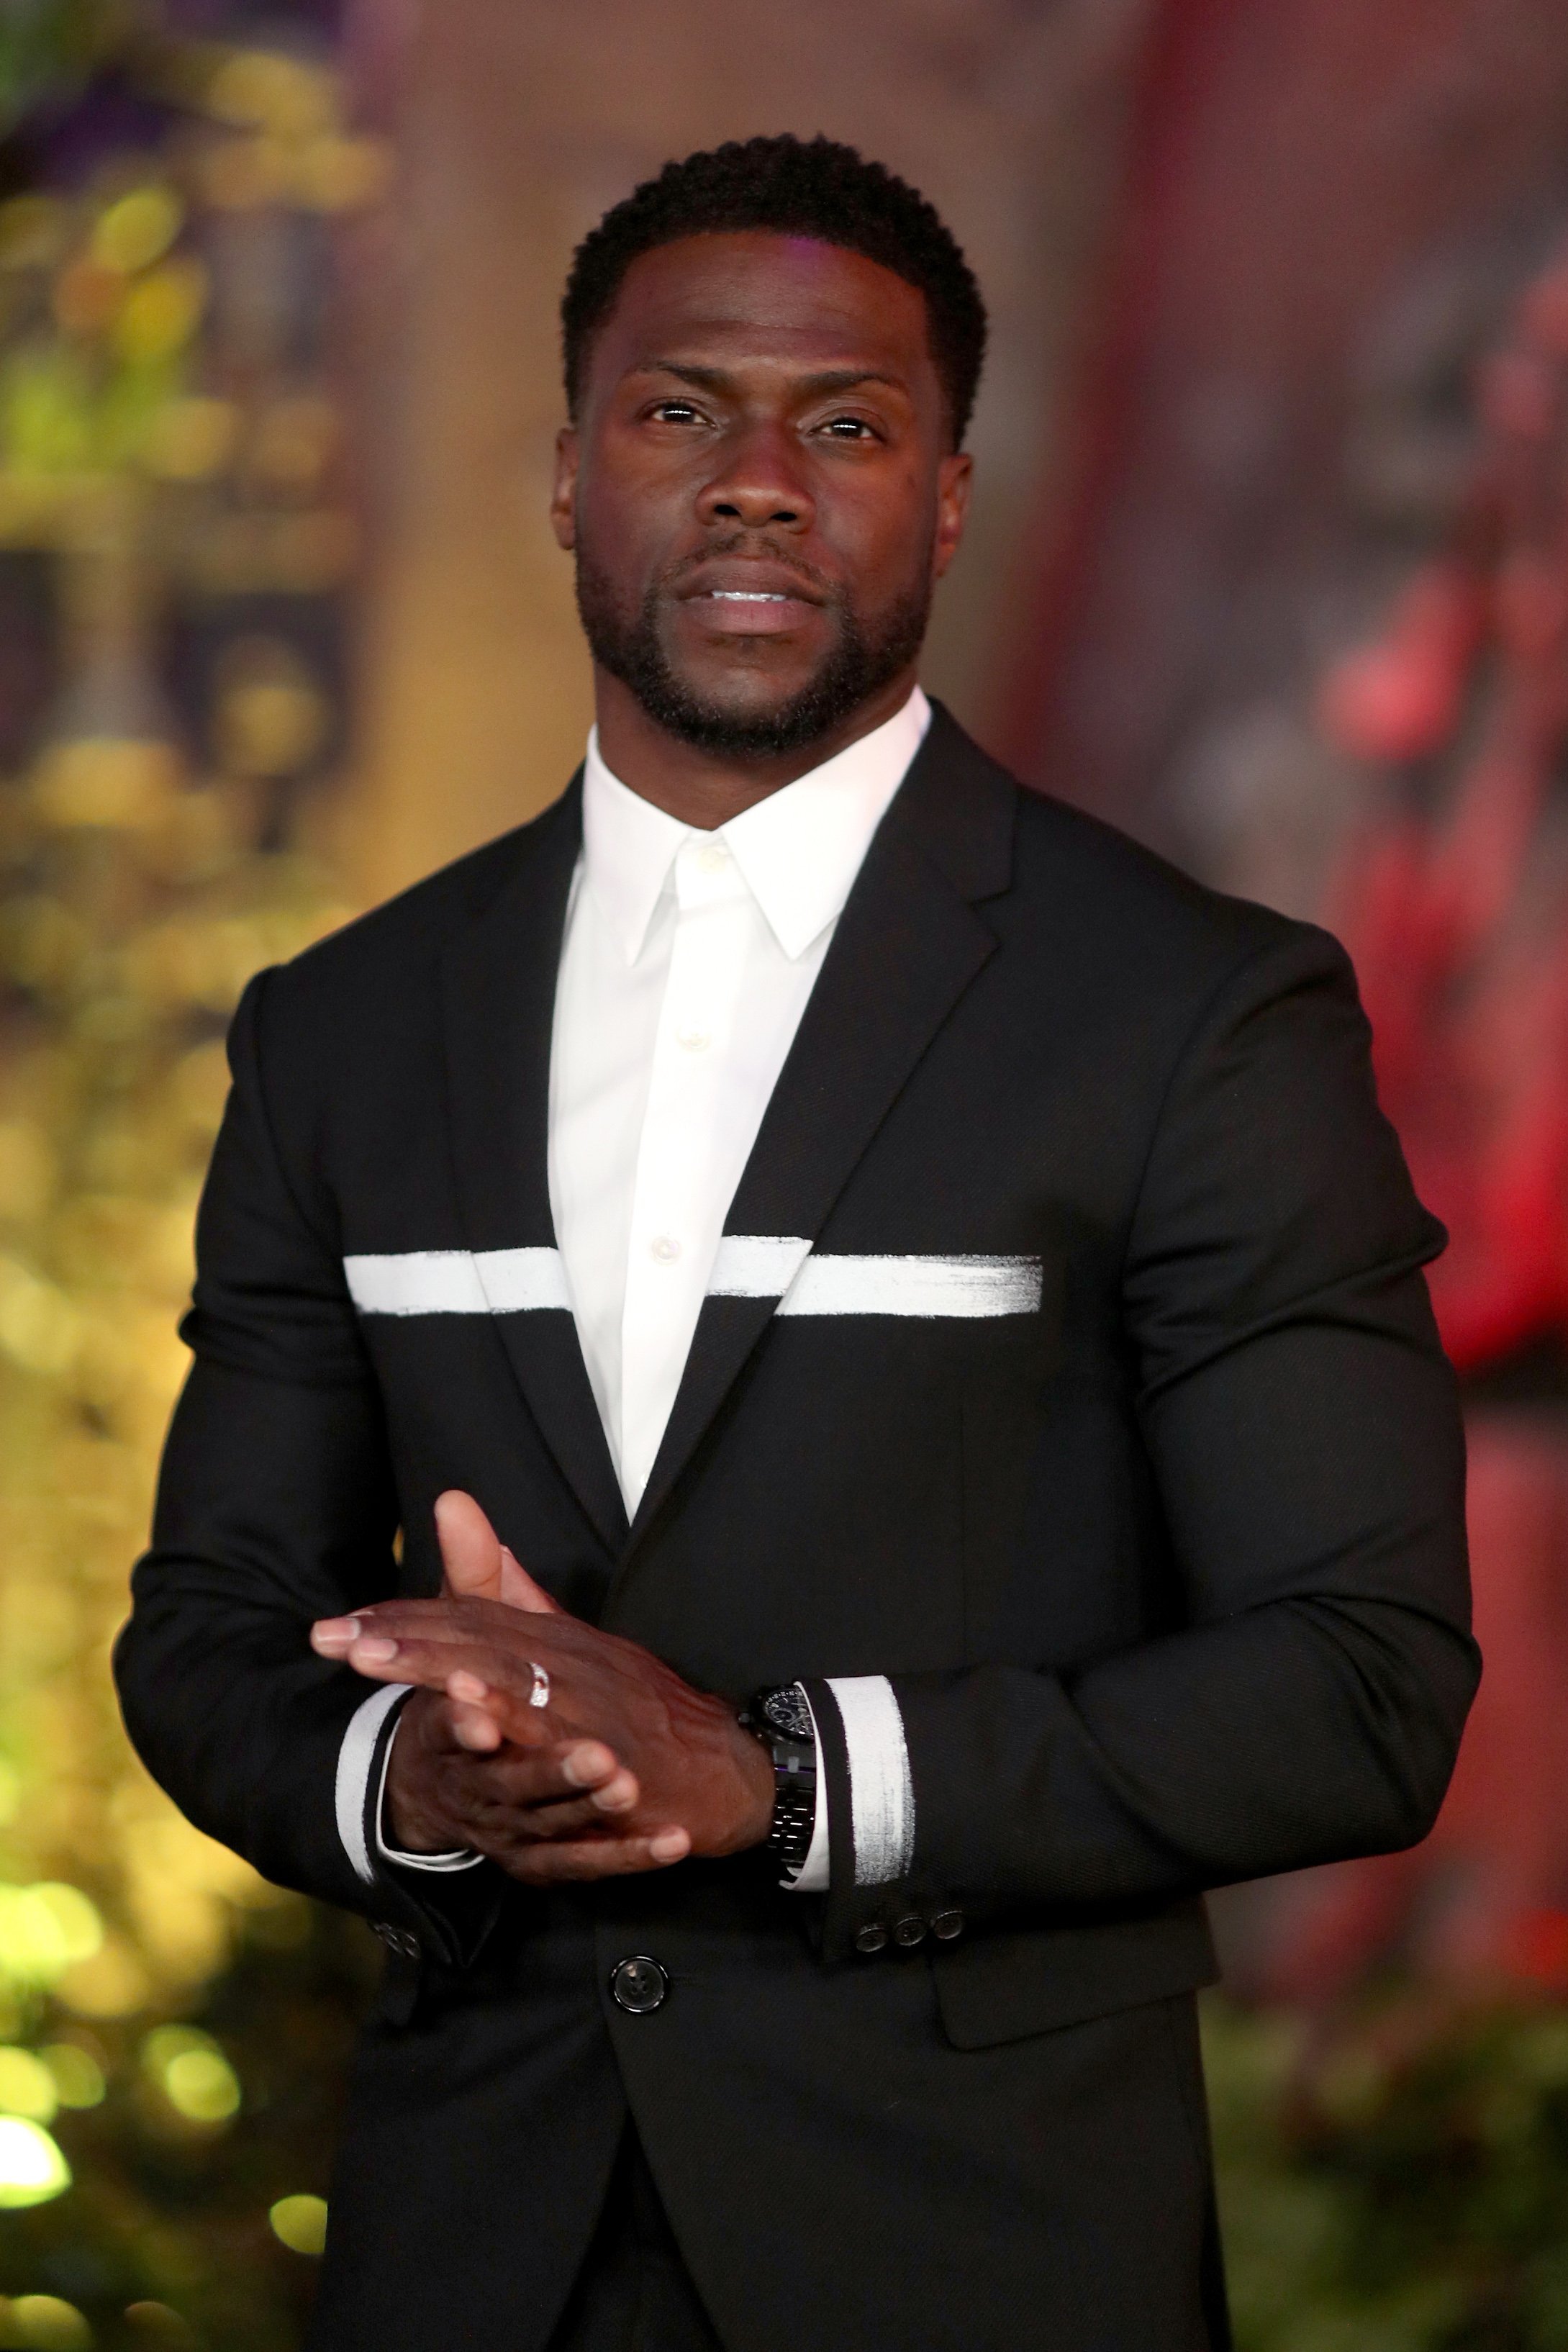 Kevin Hart at the premiere of "Jumanji: Welcome To The Jungle" on Dec. 11, 2017 in California. | Photo: Getty Images